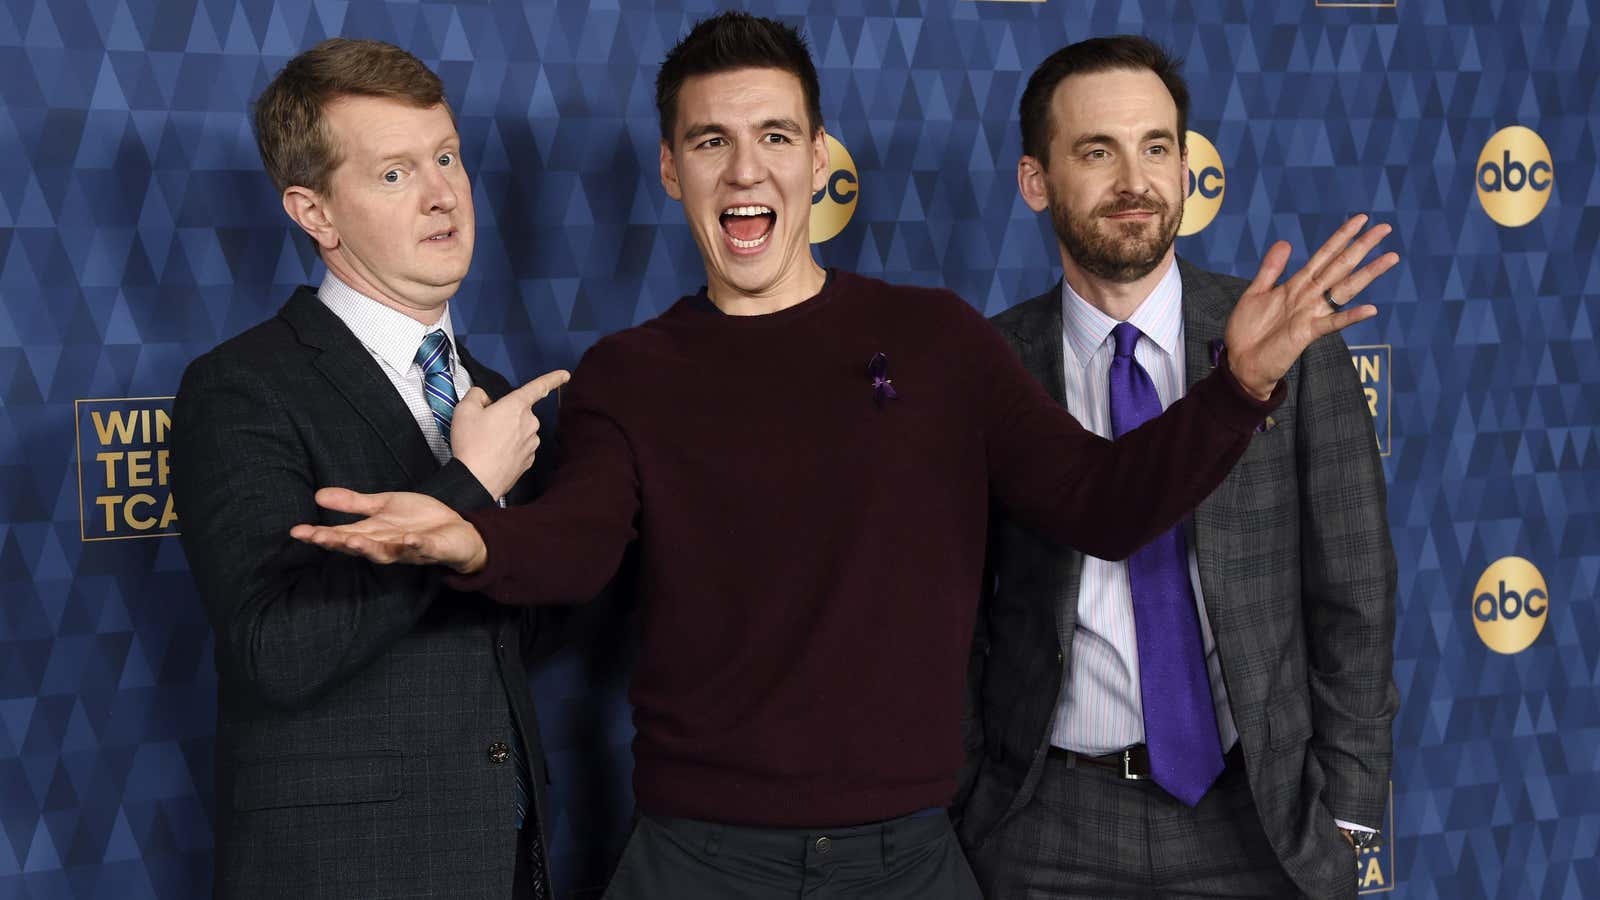 The three greatest Jeopardy players of all time.